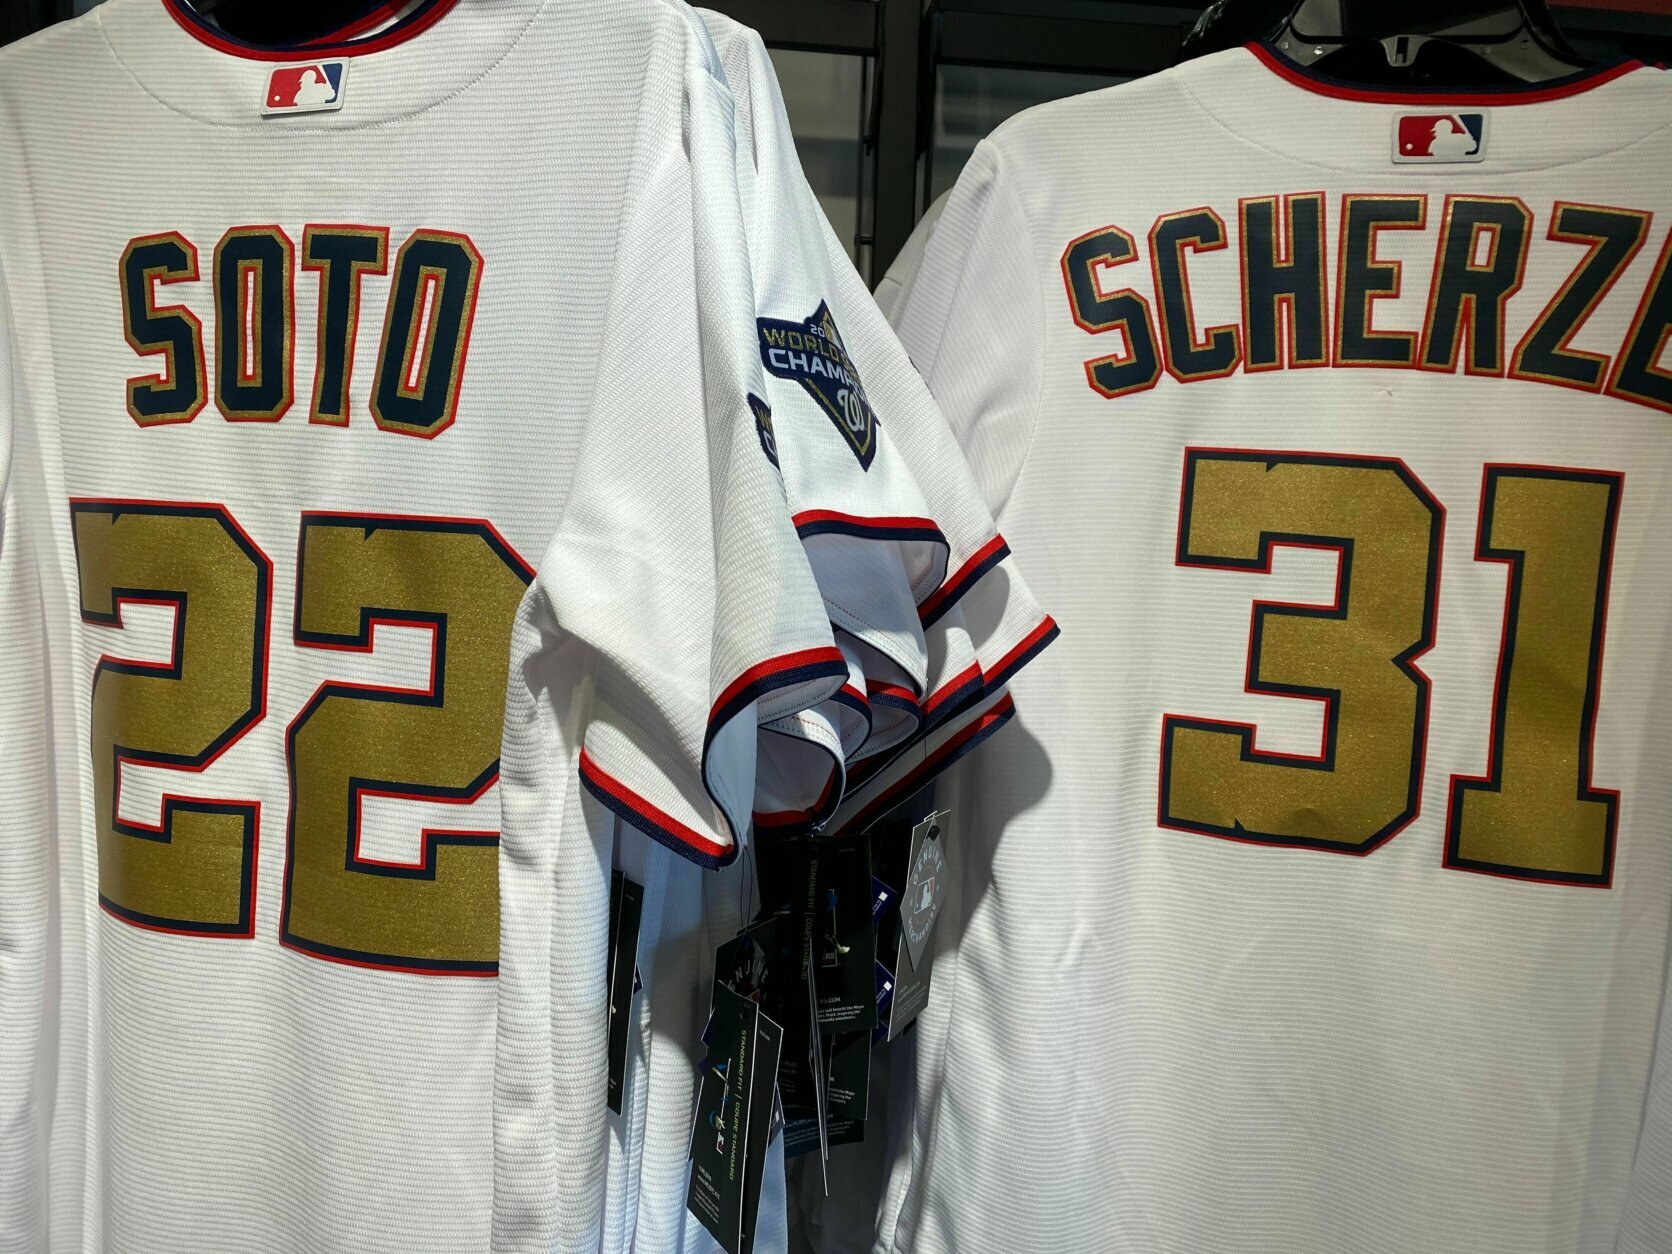 Sale > nationals world series jersey gold> in stock OFF-54%